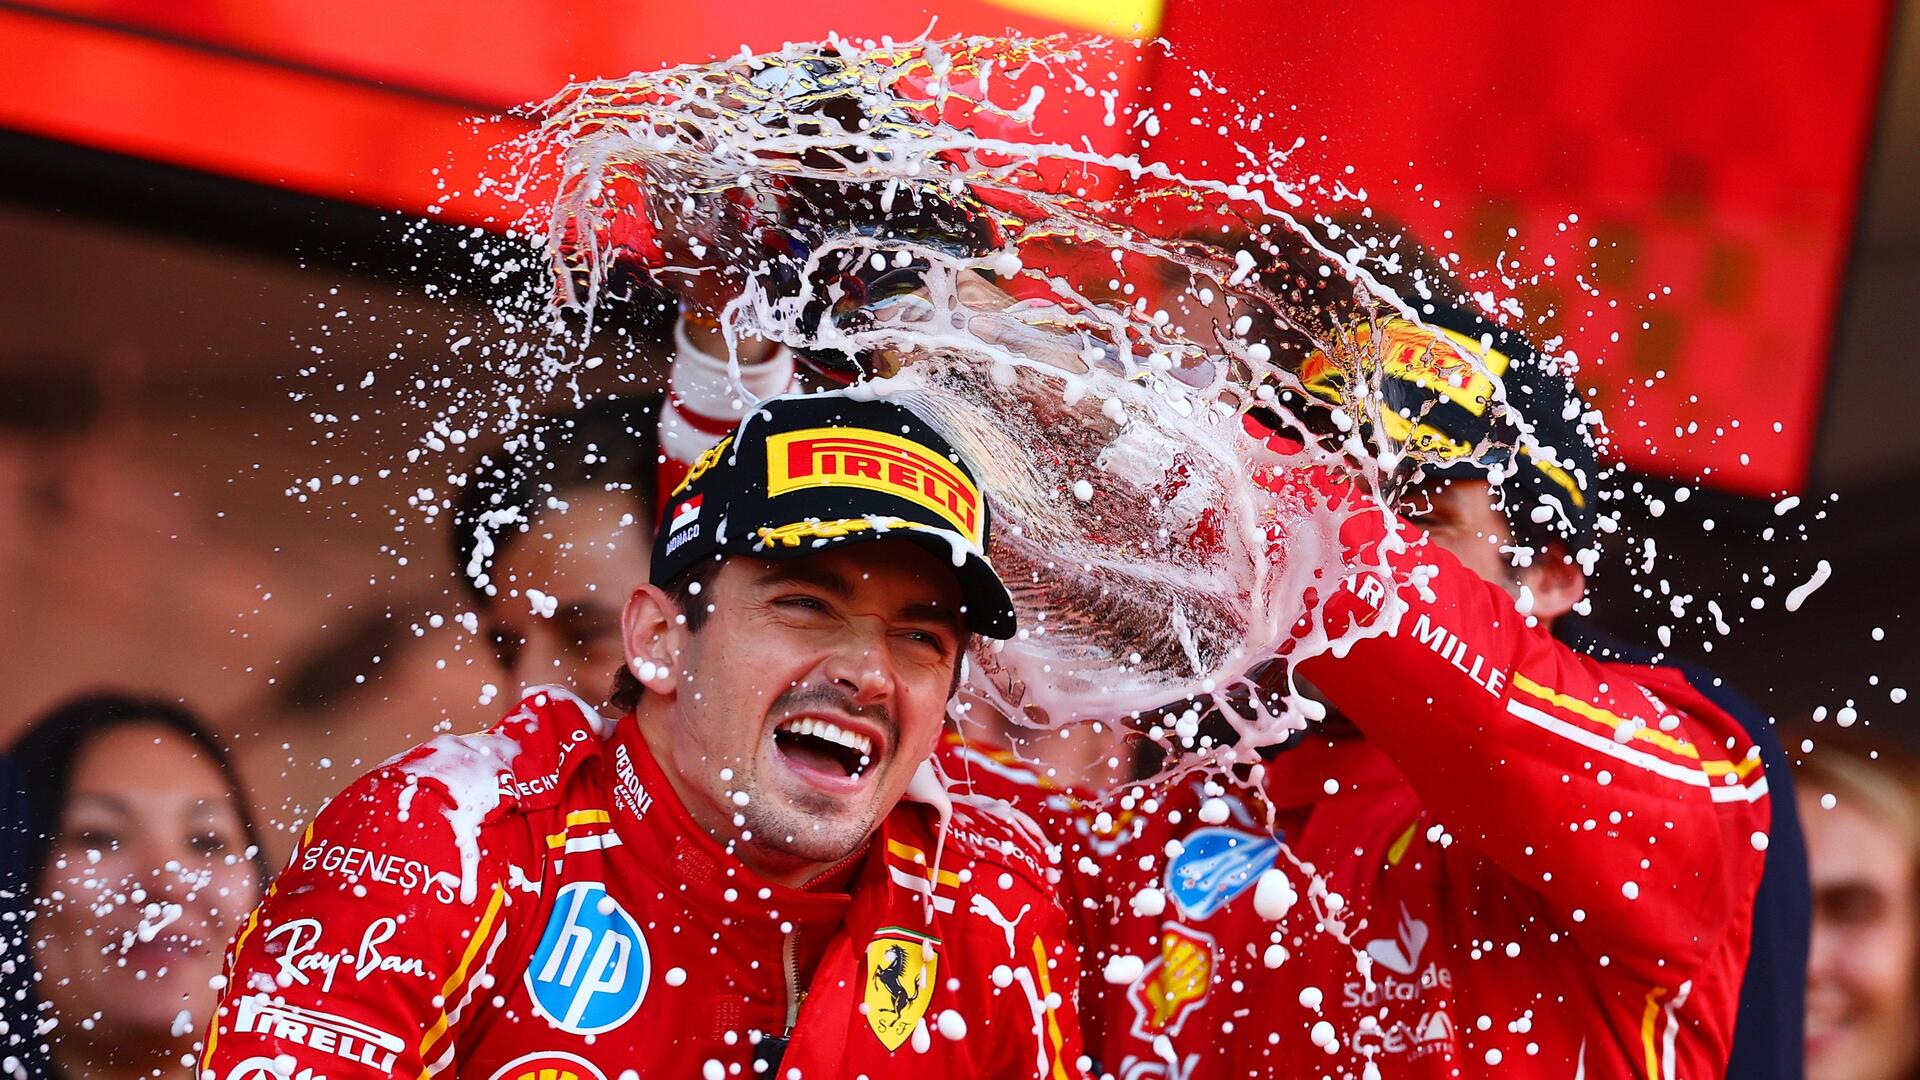 Charles Leclerc attains these feats with Monaco GP win: Details 